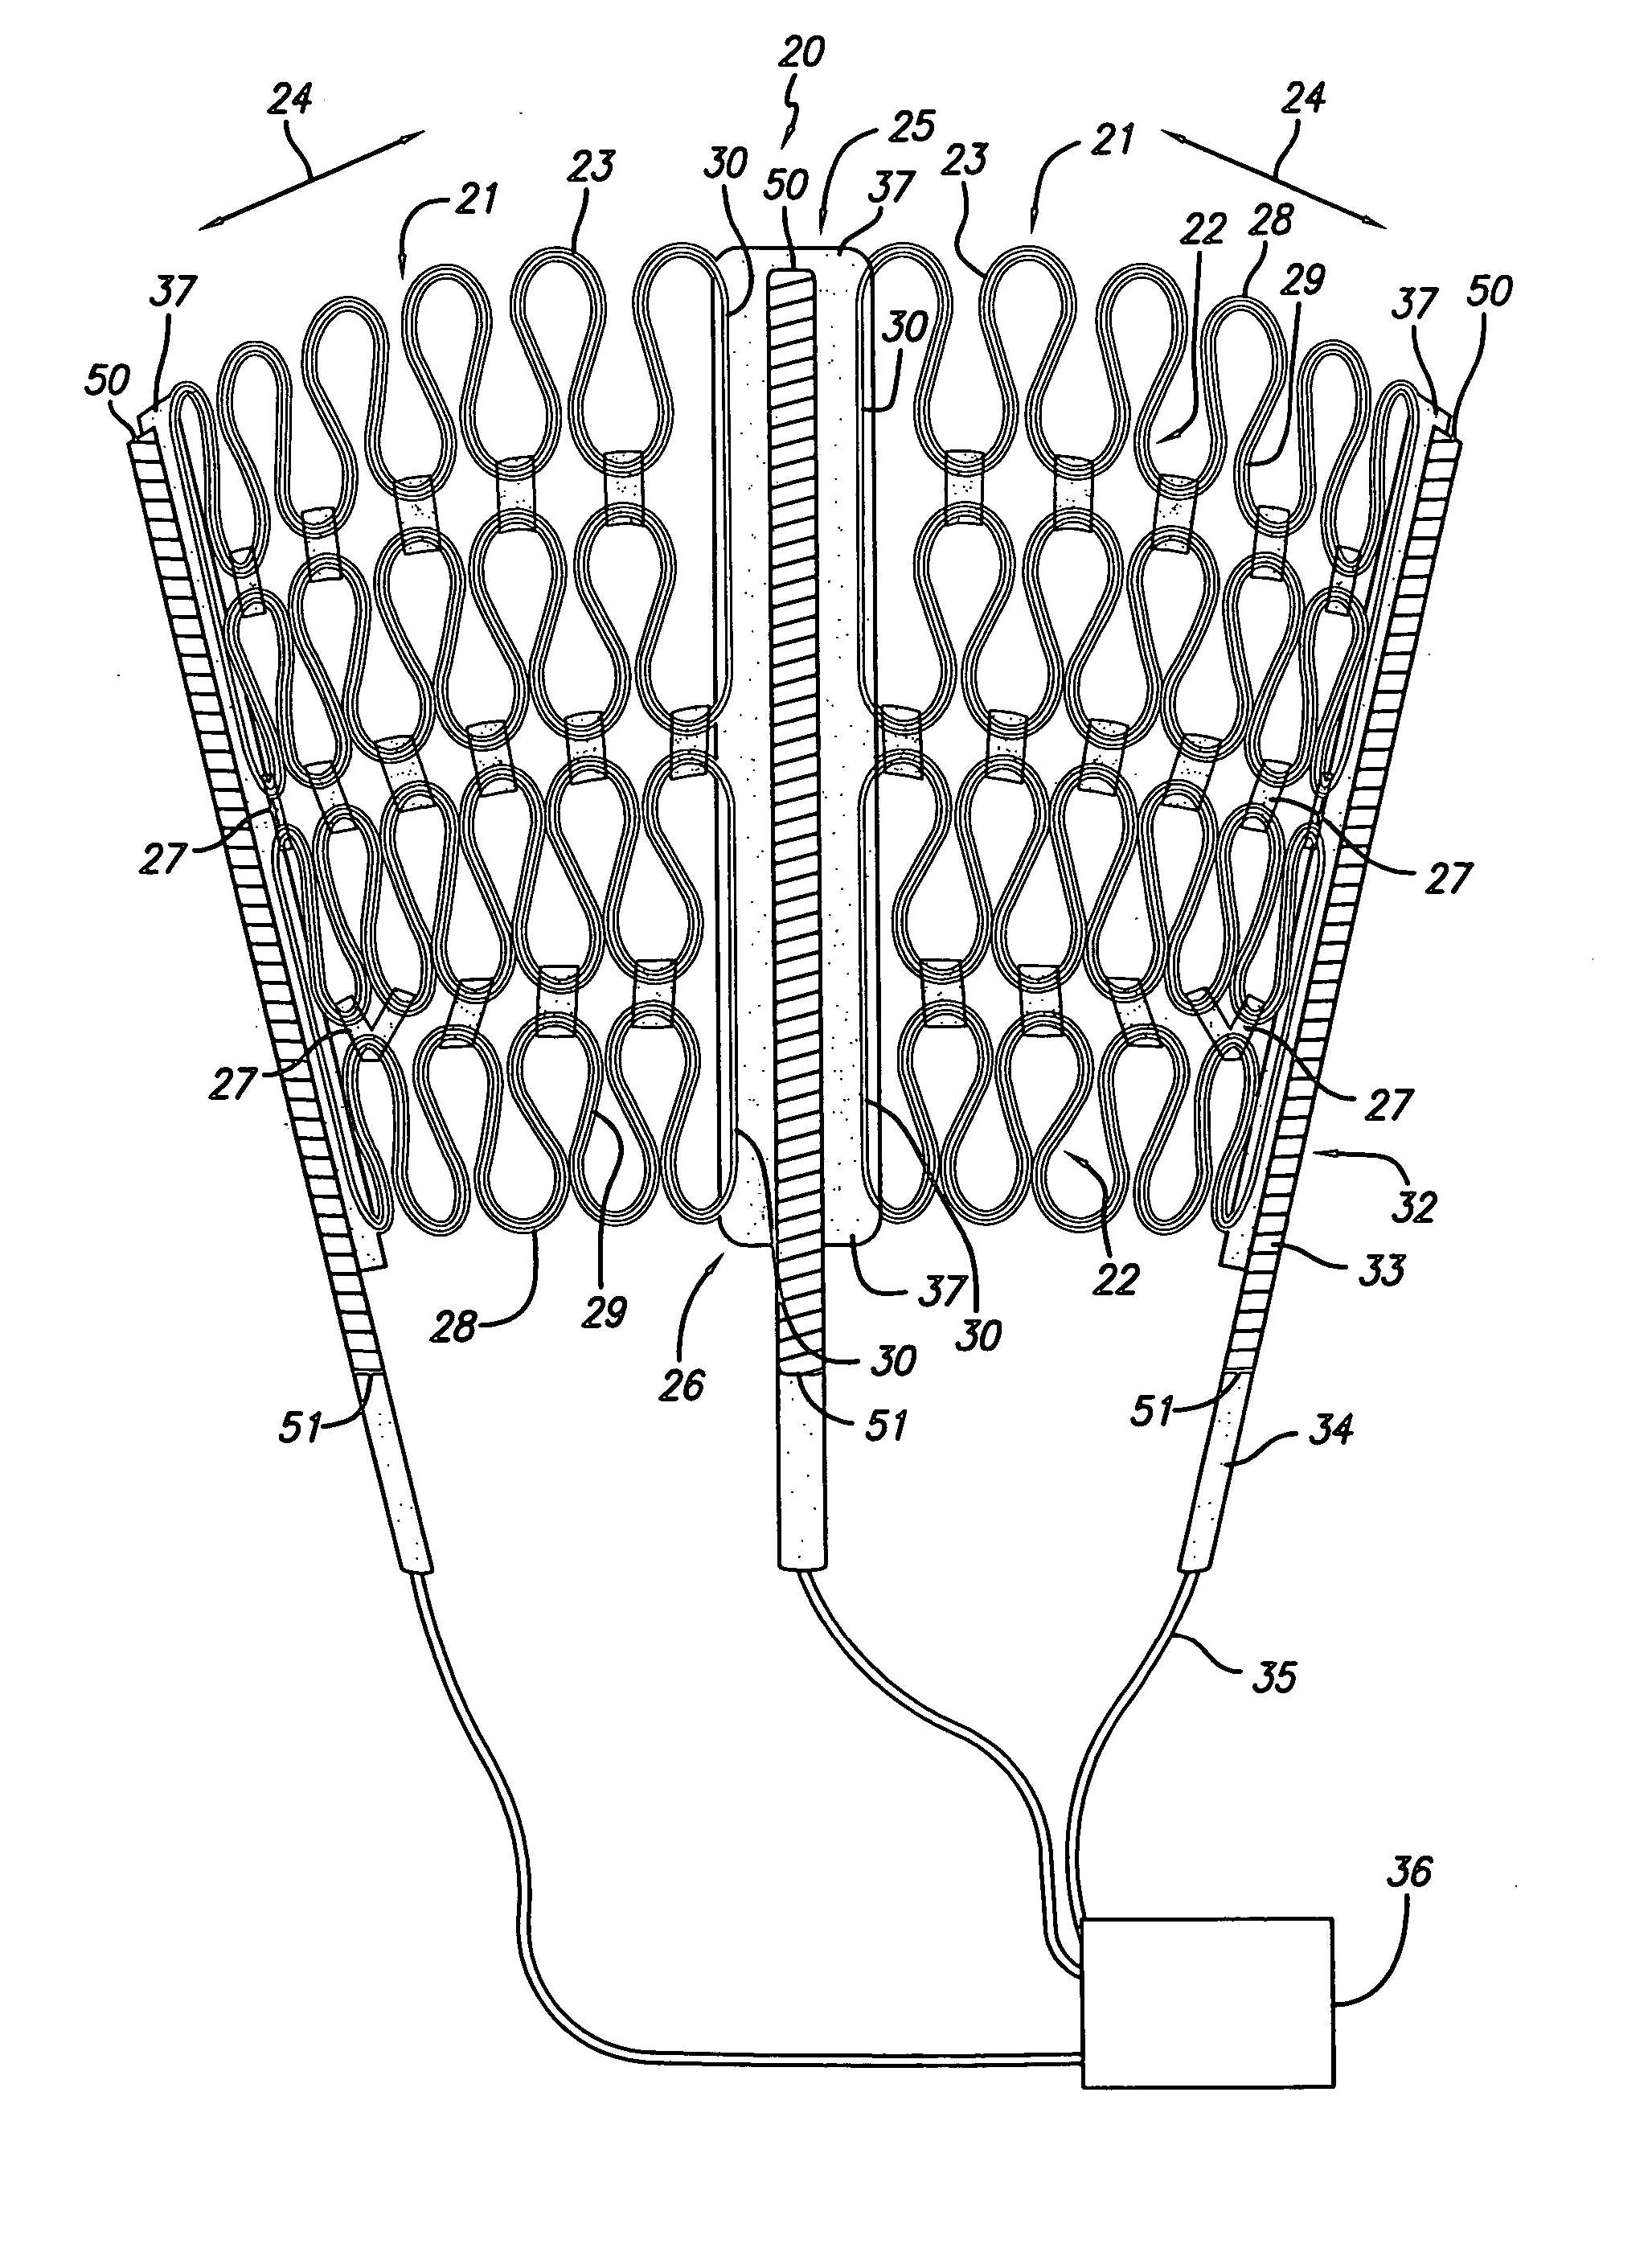 Cardiac harness having leadless electrodes for pacing and sensing therapy